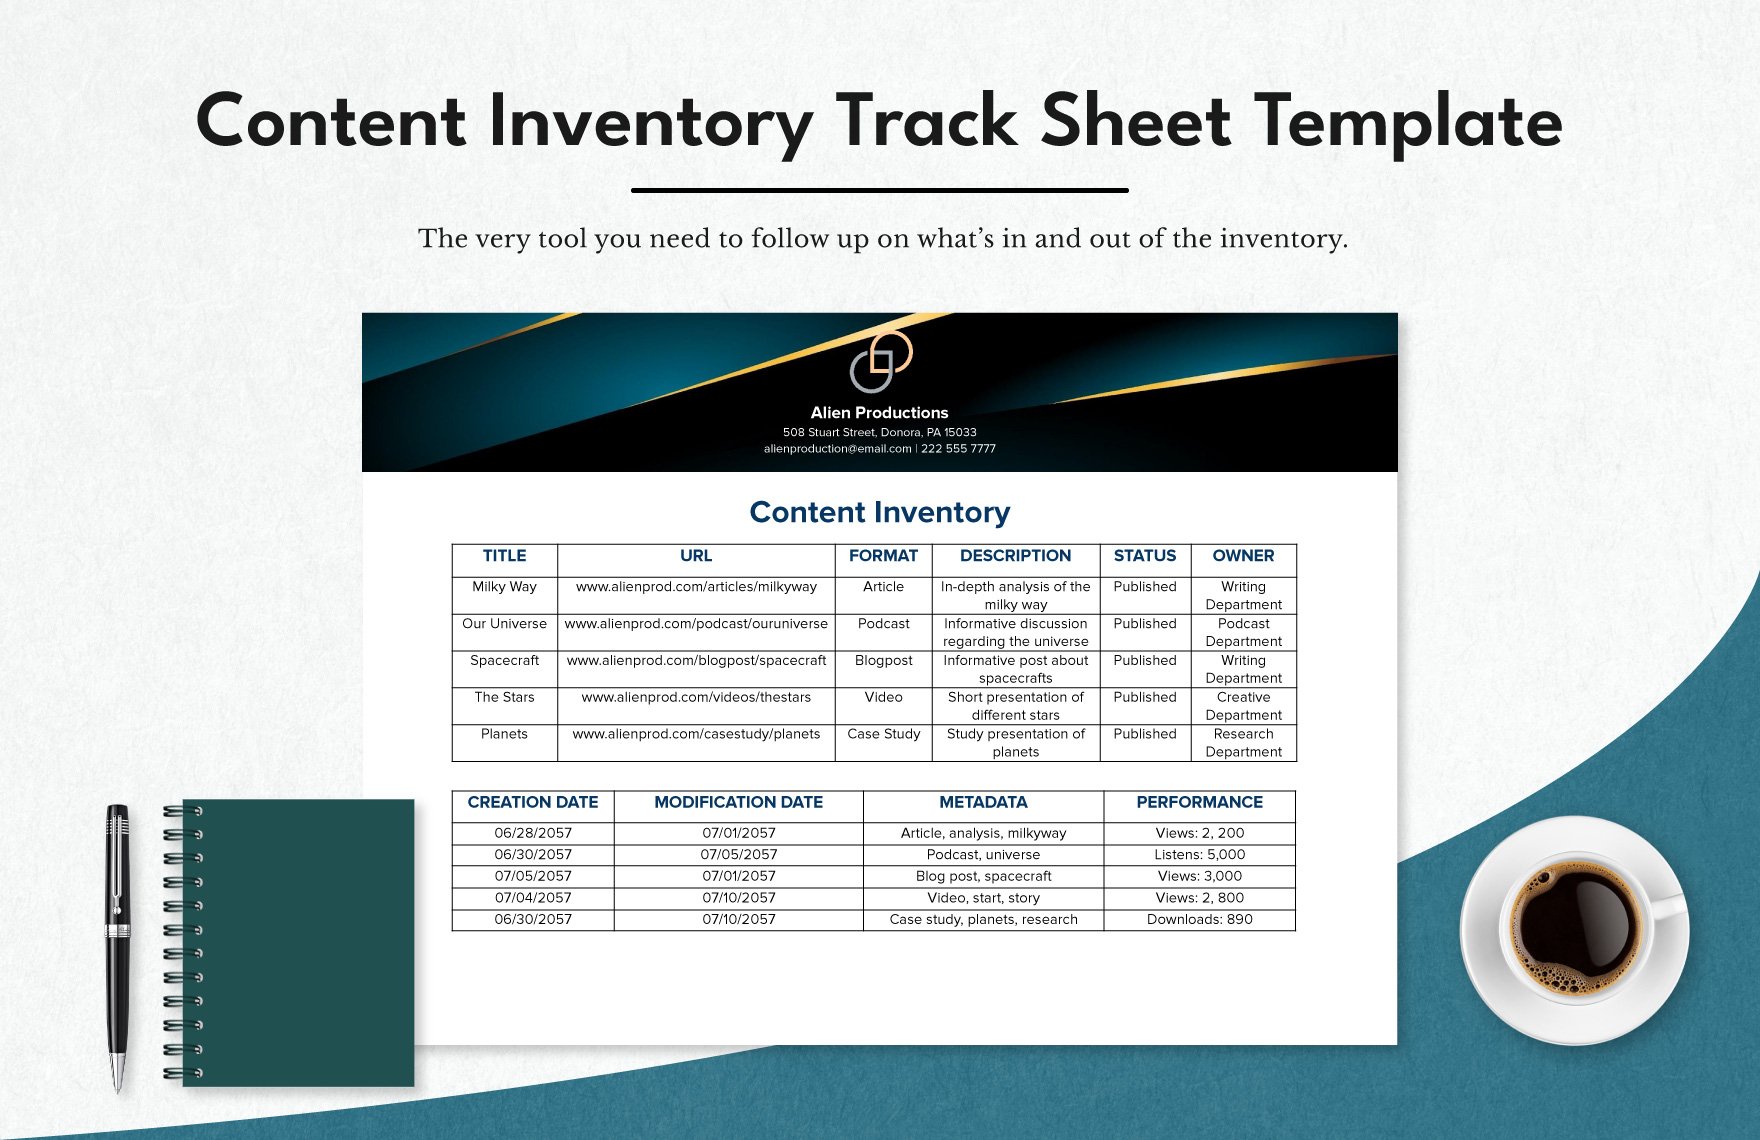 Content Inventory Track Sheet Template